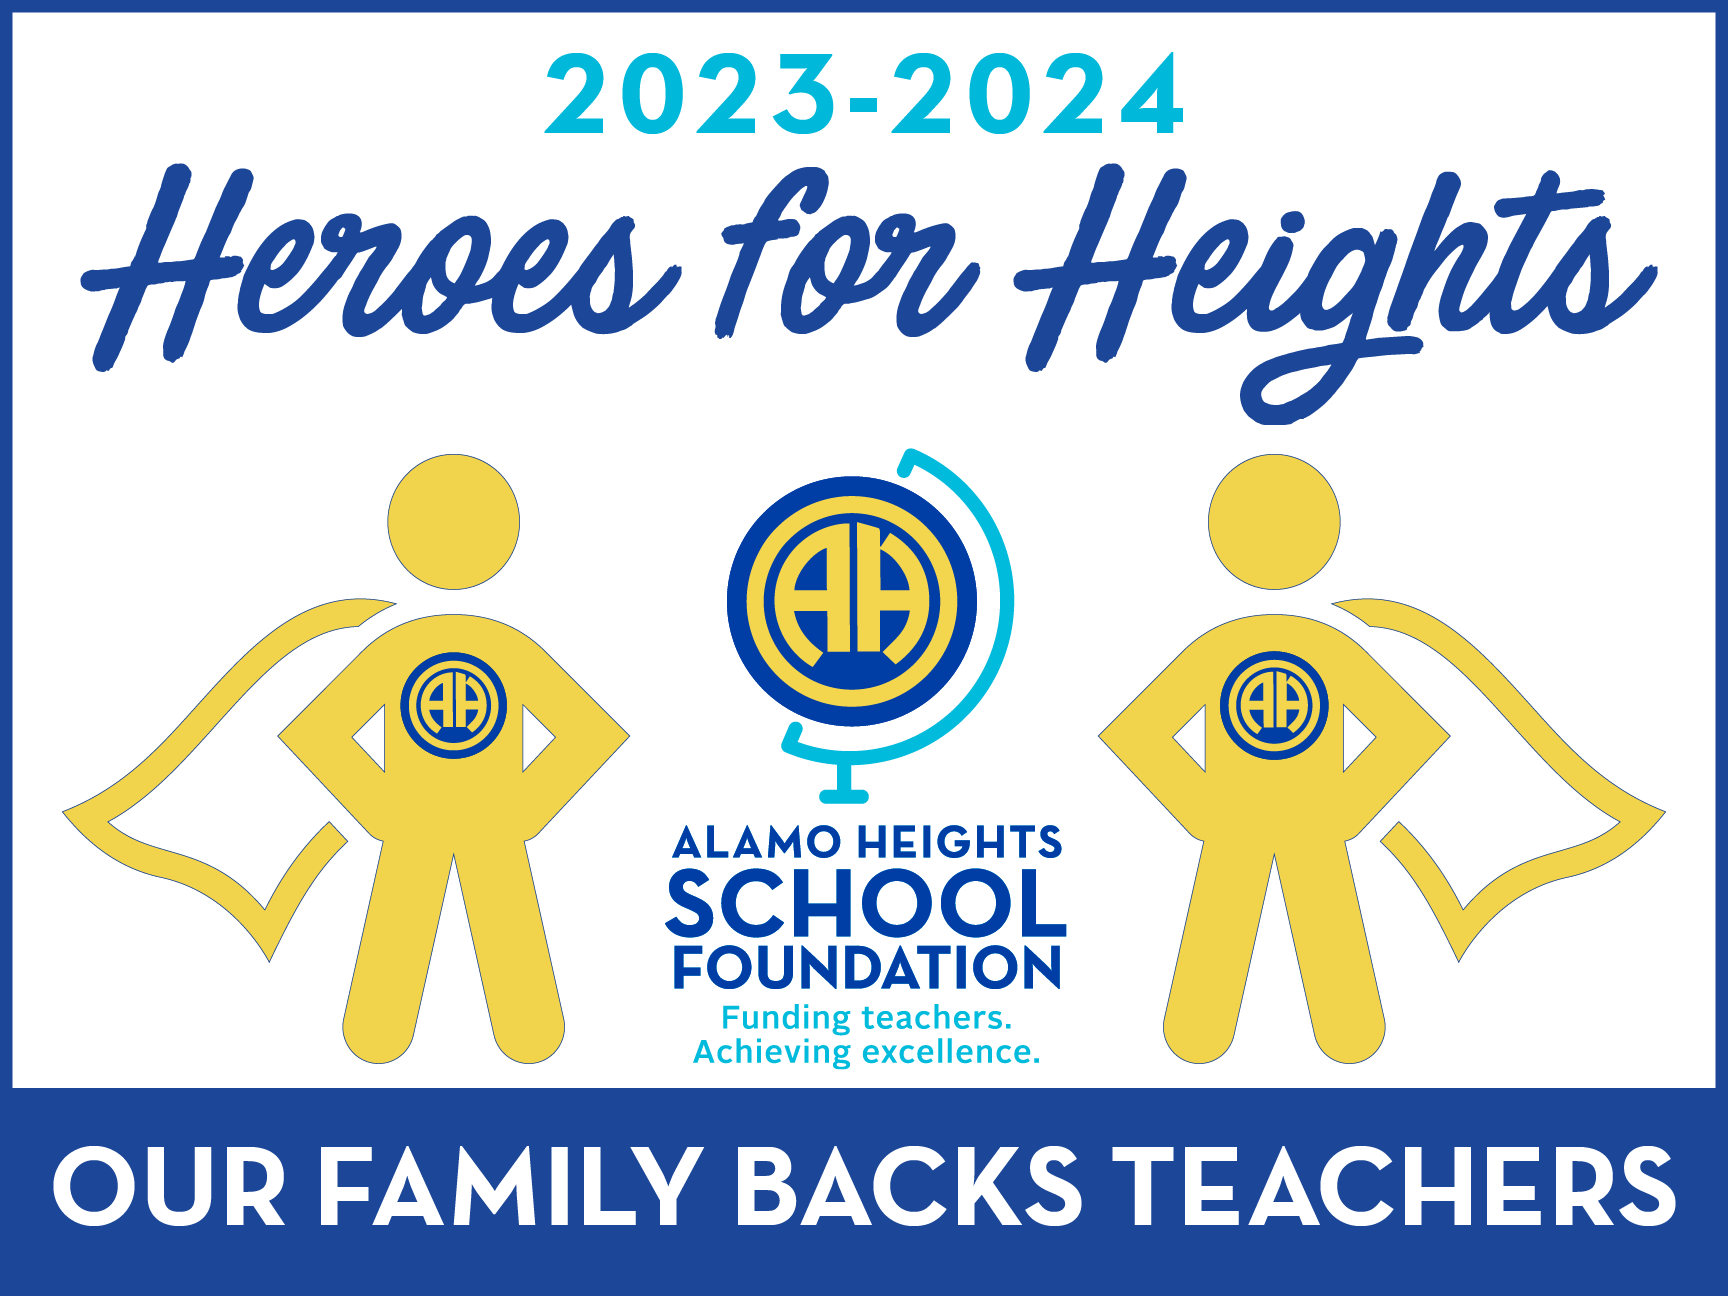 Heroes for Heights 2023 - 2024